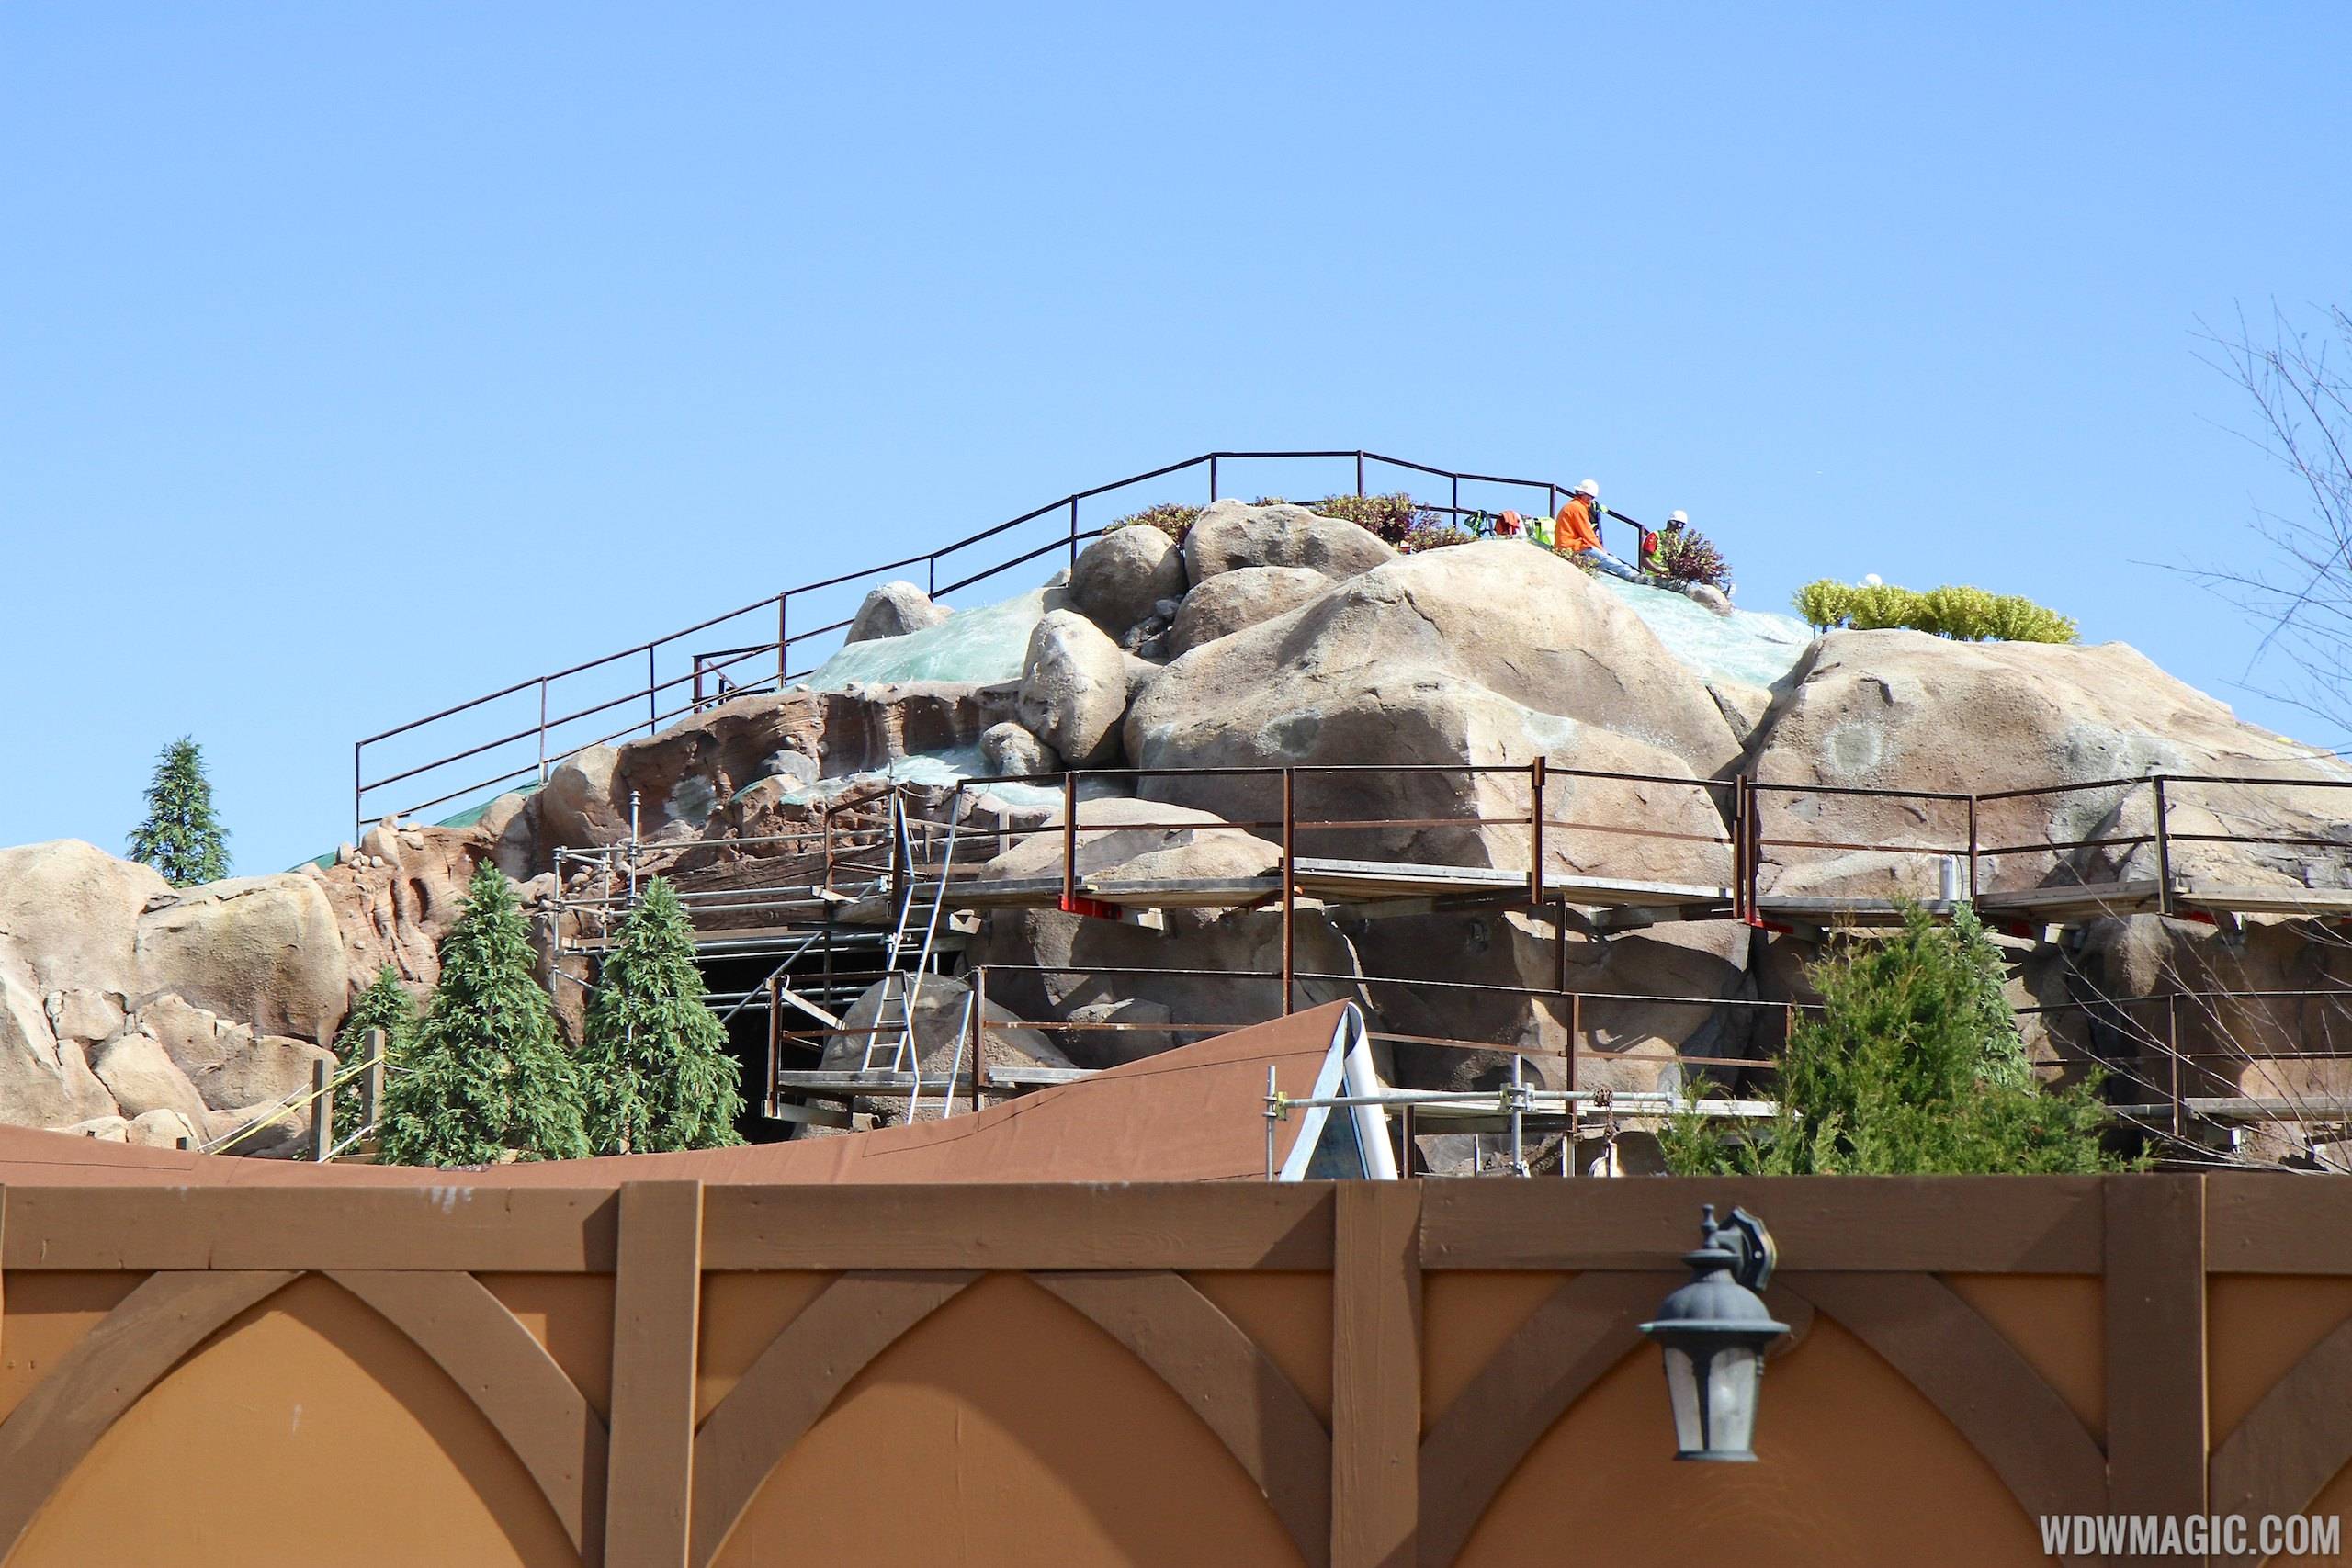 Trees and other landscaping at the Seven Dwarfs Mine Train